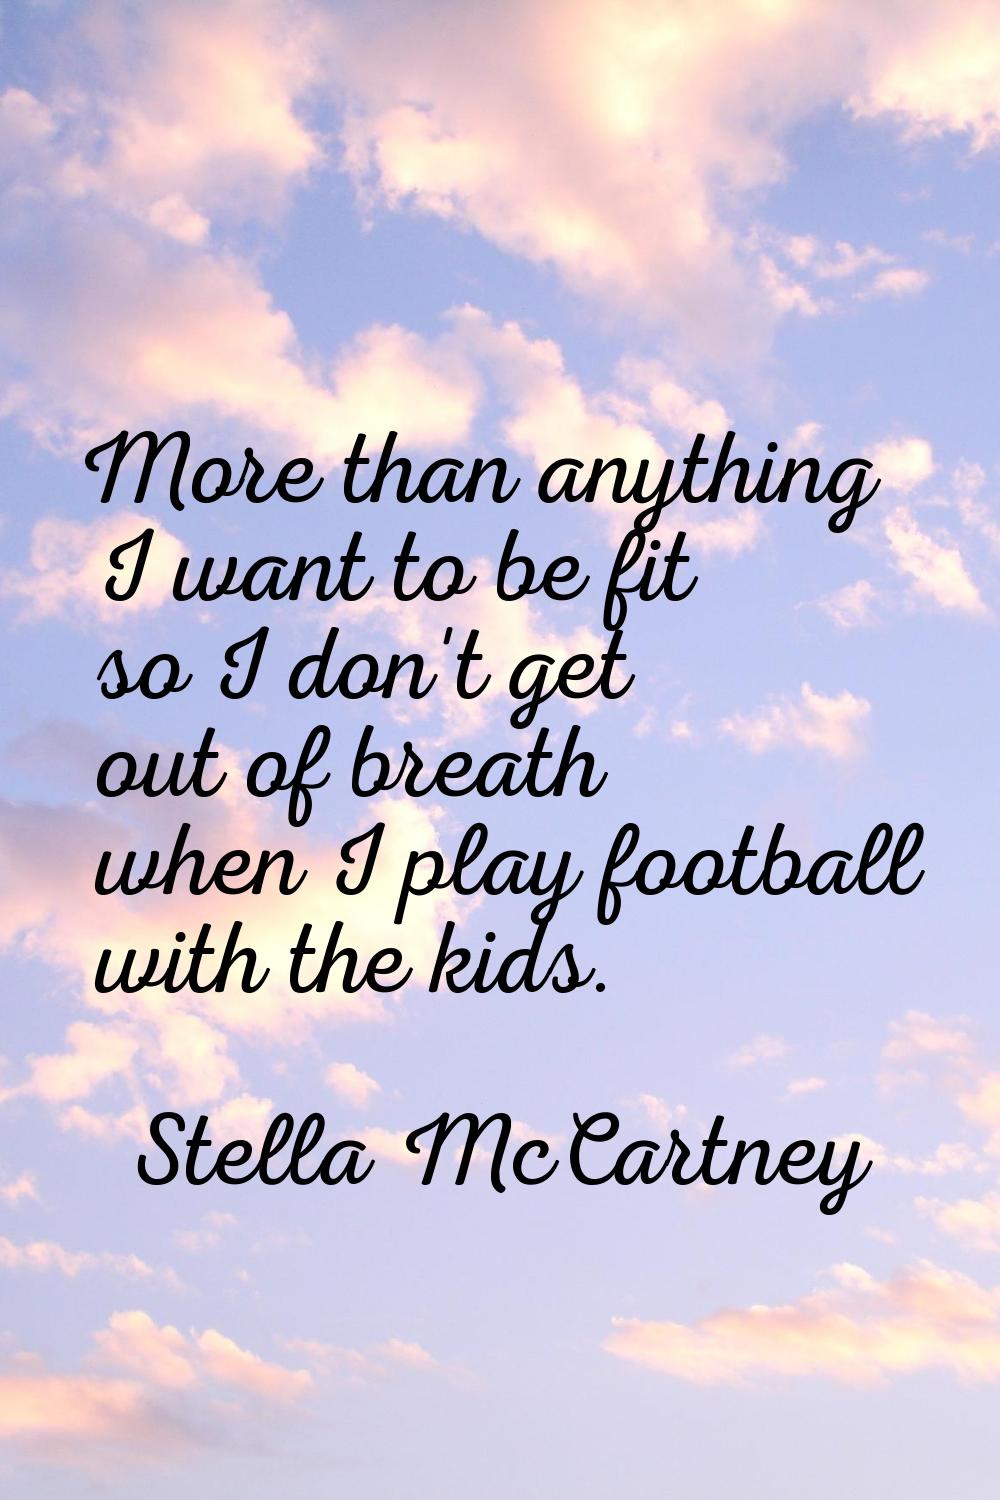 More than anything I want to be fit so I don't get out of breath when I play football with the kids